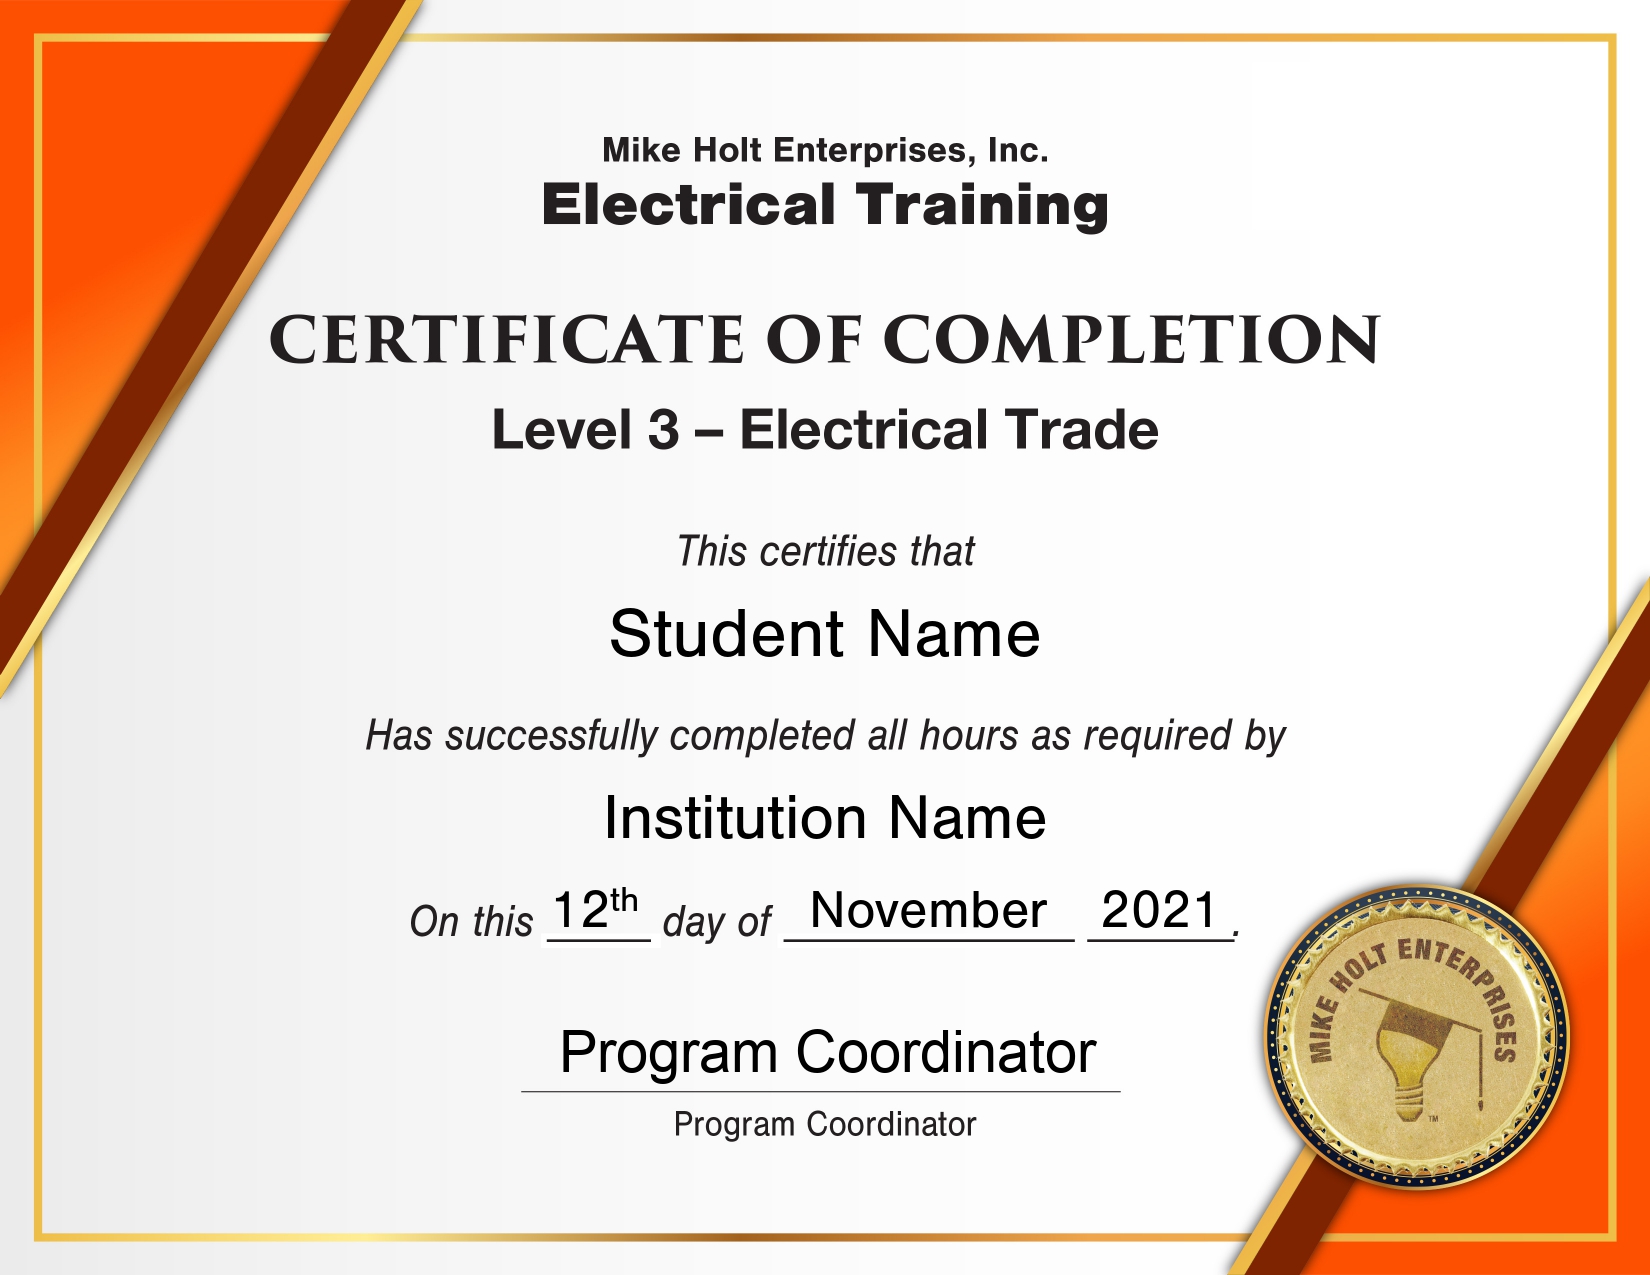 Certificate of Completion for Level 3